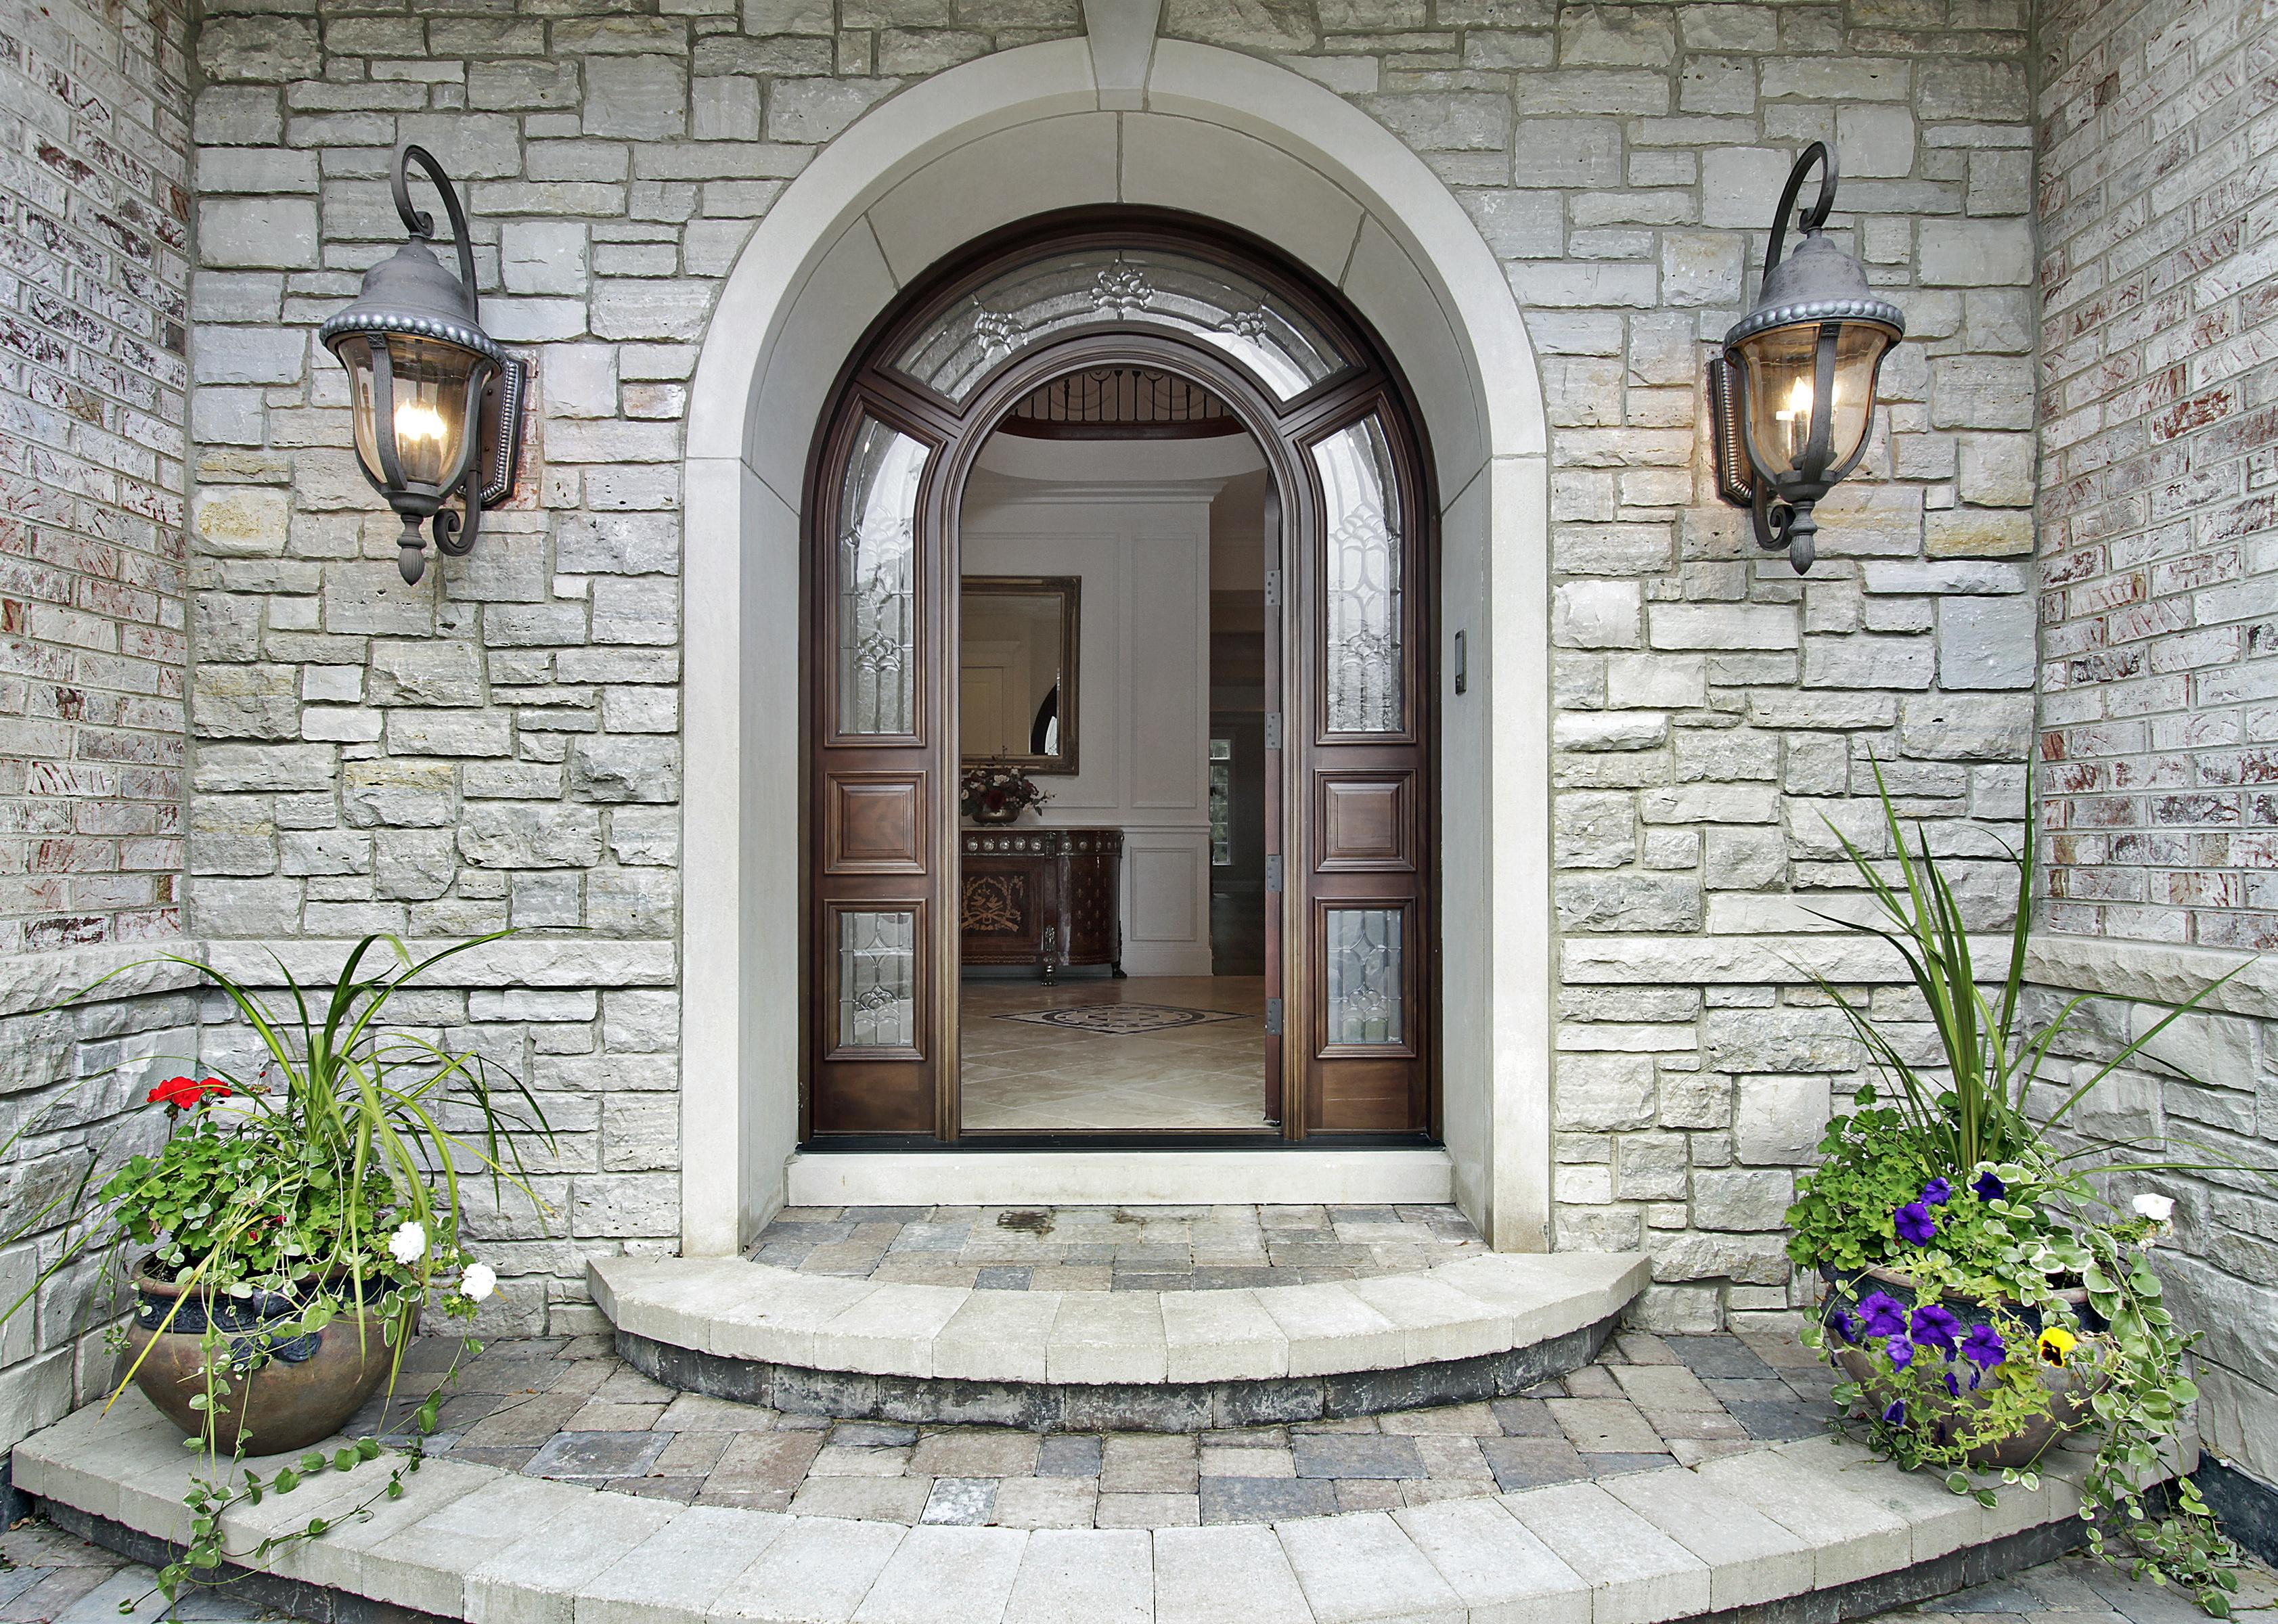 The grand open front door into a light-colored brick mansion.